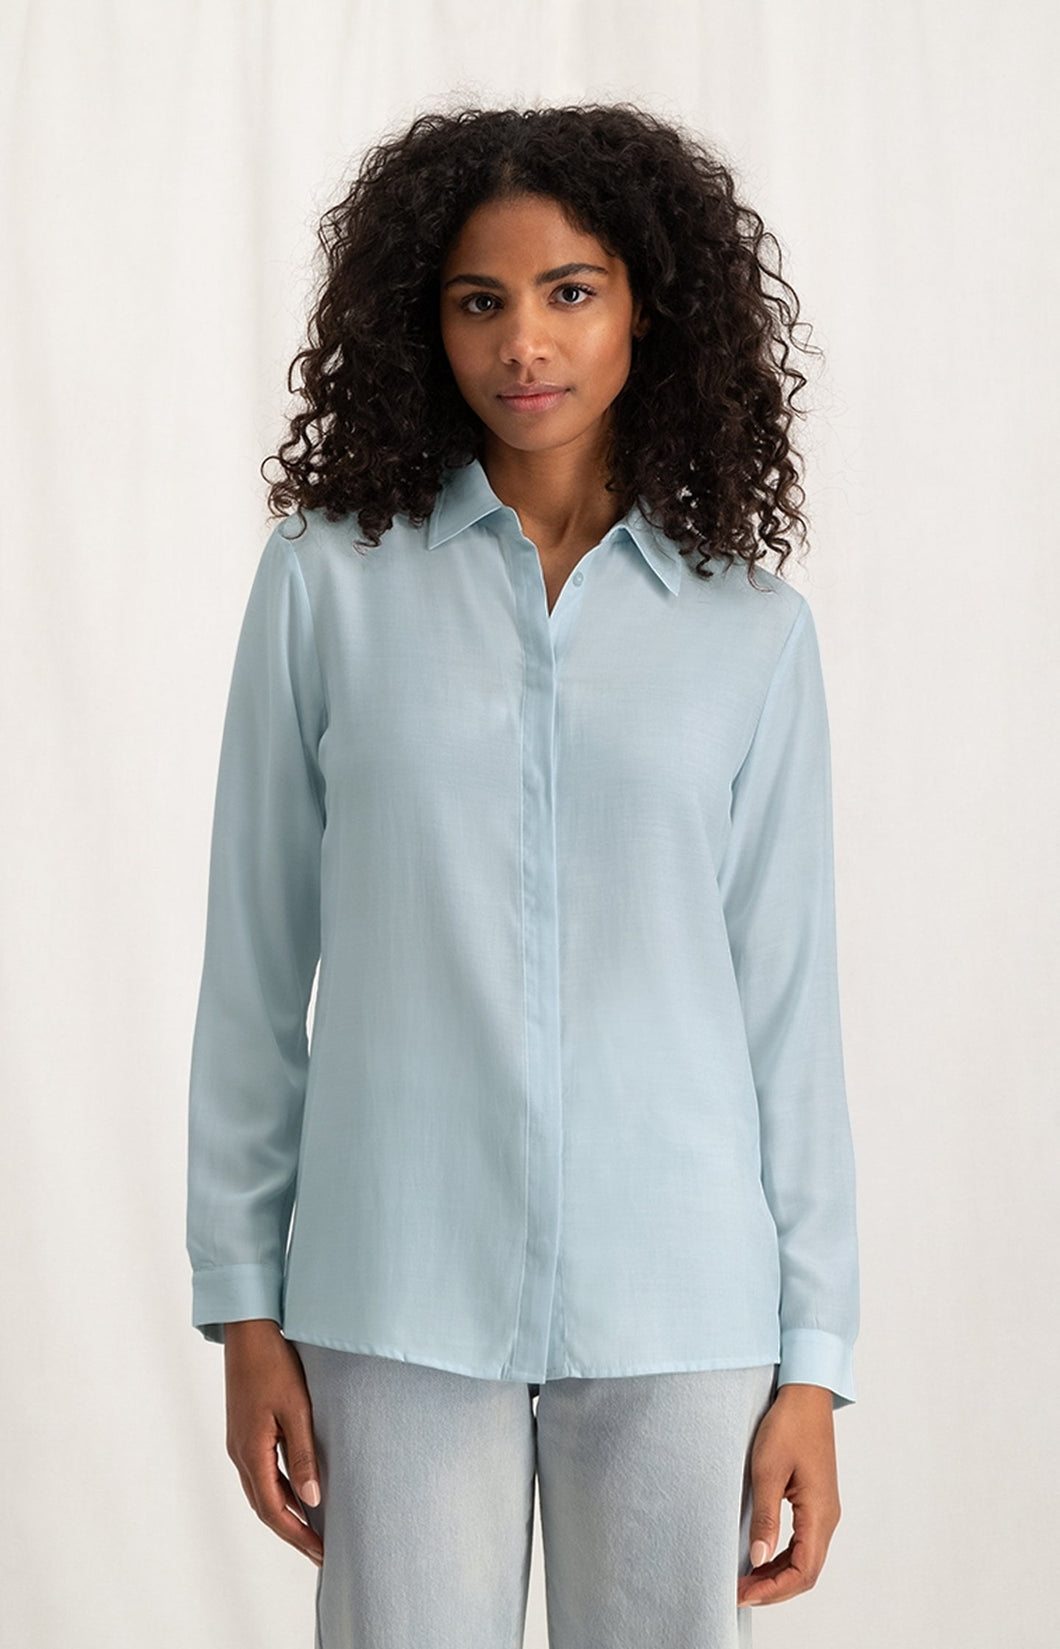 Soft blouse with collar, long sleeves and hidden buttons